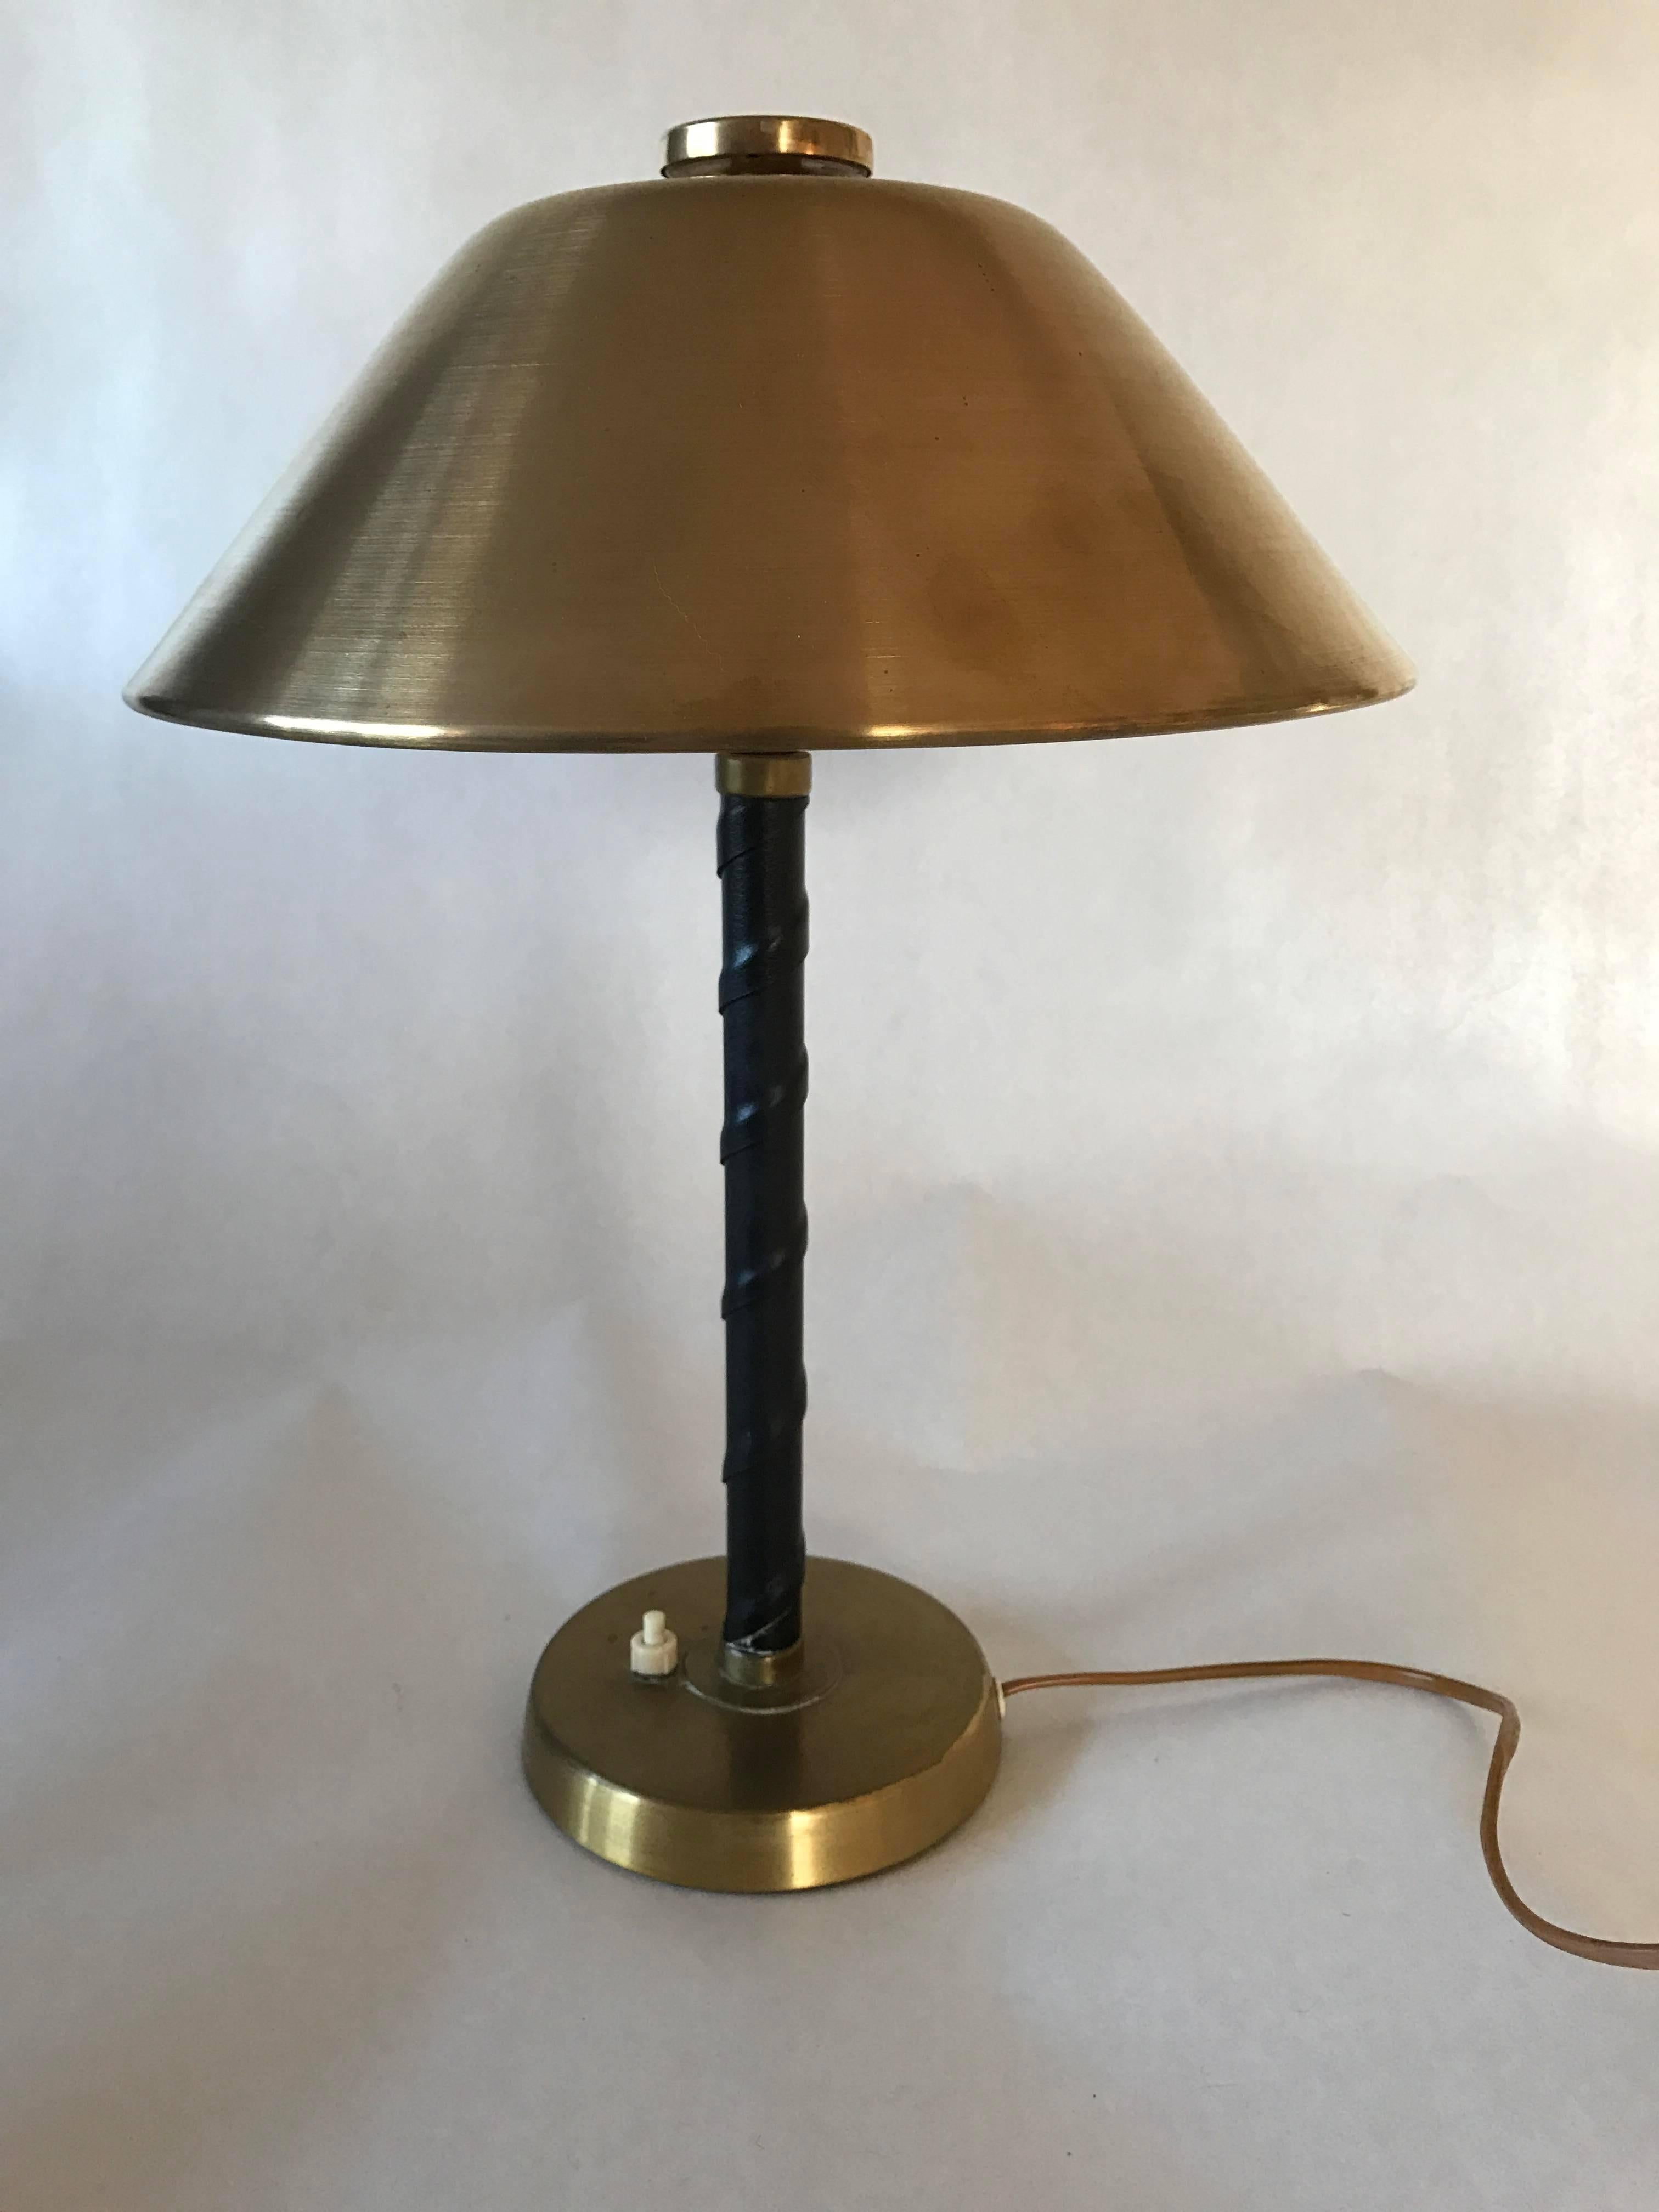 A very beautiful table lamp made by the Swedish lamp manufacturer Einar Bäckström, the foot is made of brass and dark brown leather, the shade is made of brass. The lamp has been rewired with brand new cords. Measures: The height is 42cm and the